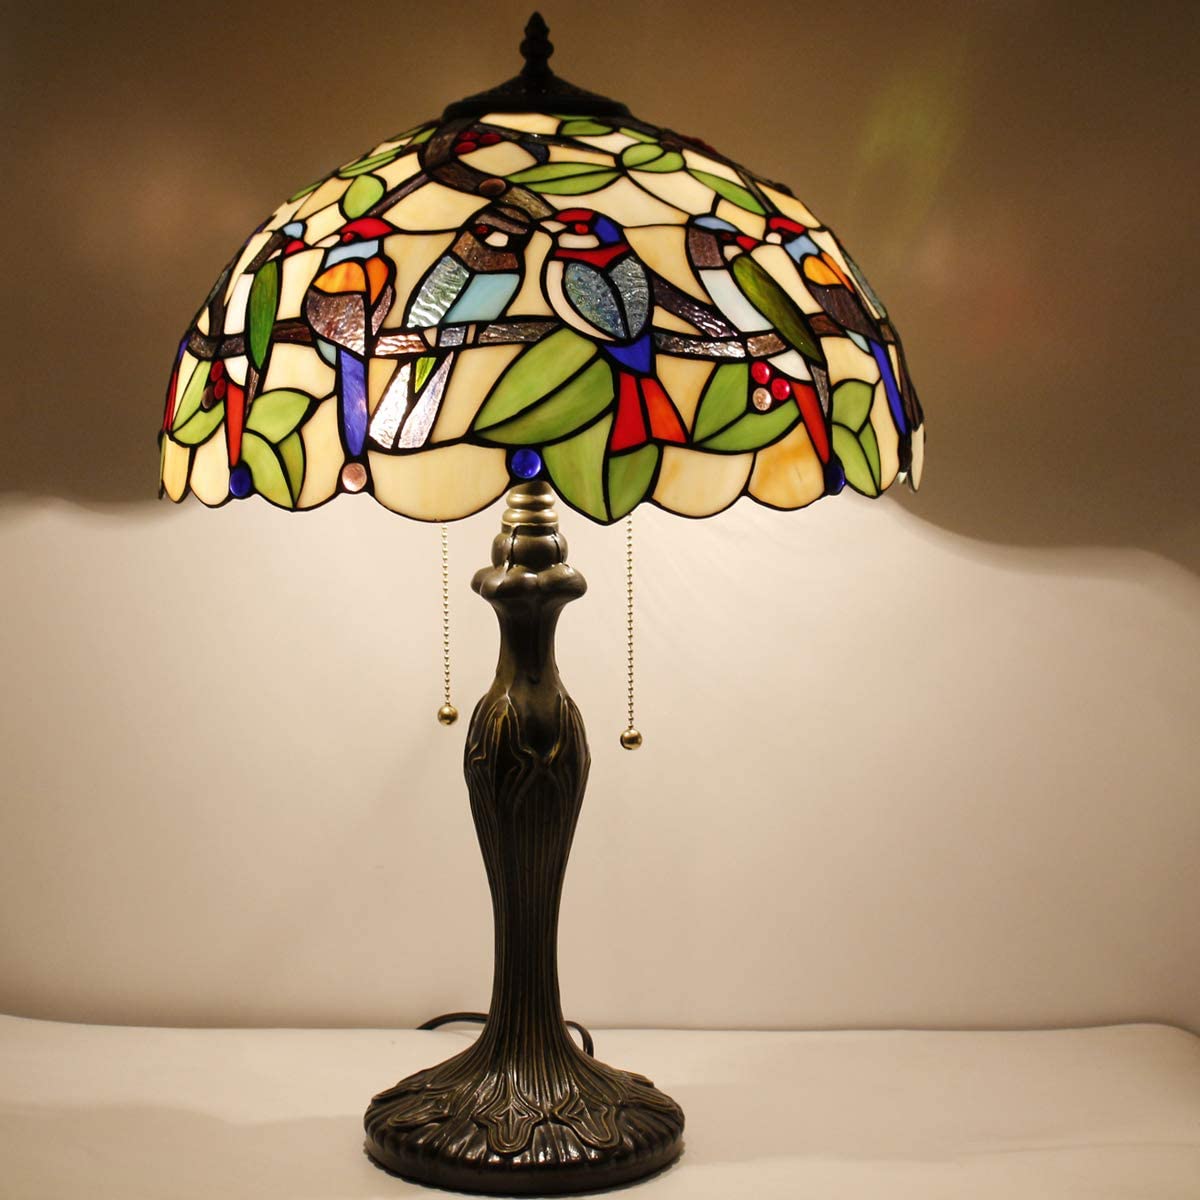  Table Lamp Colorful Stained Glass Birds Bedside Lamp 16X16X24 Inches Desk Reading Light Metal Base Decor Bedroom Living Room Home Office S805 Series